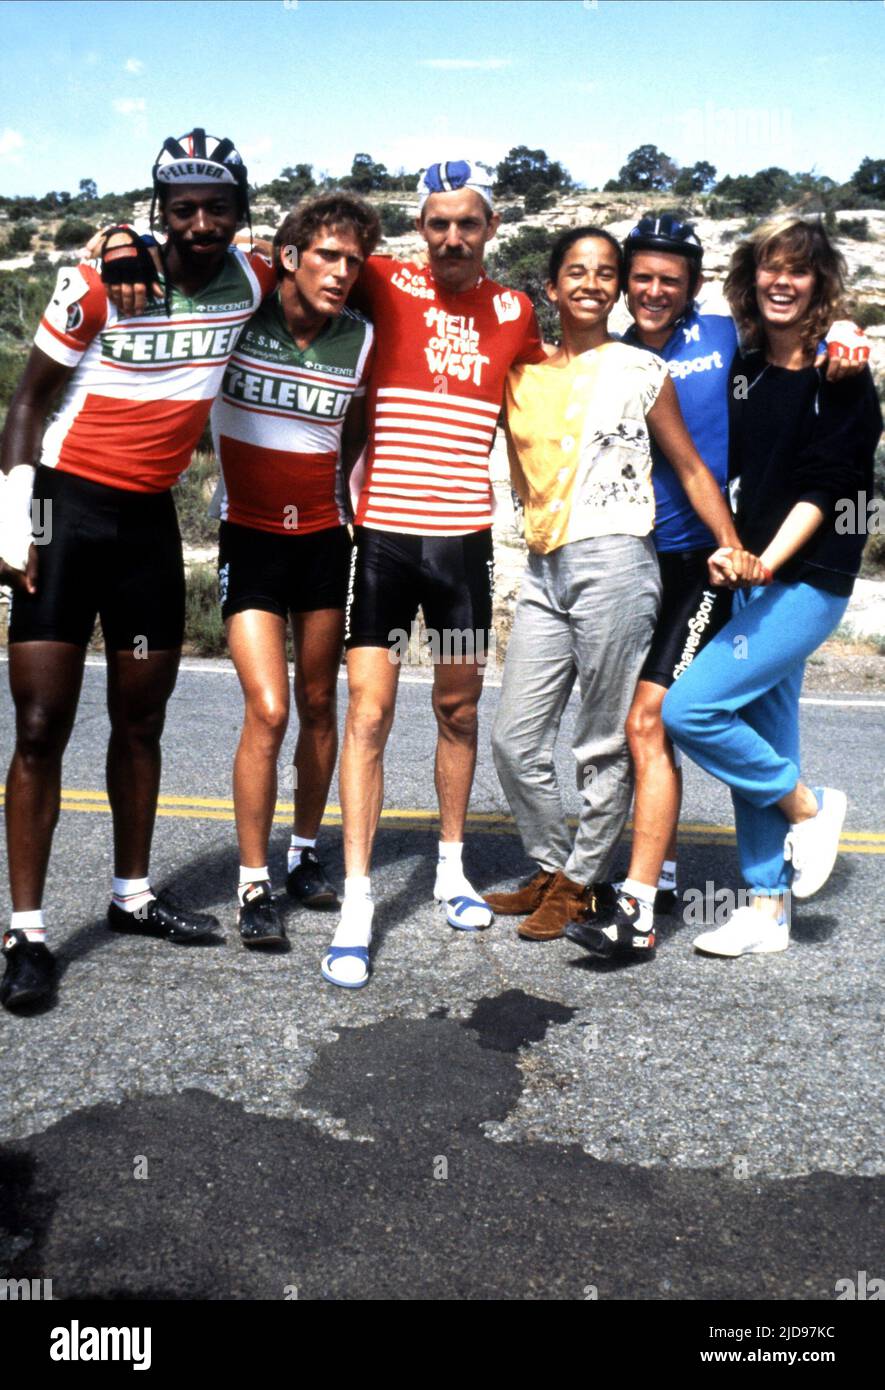 TOWNSEND,BERCOVICI,COSTNER,CHONG,GRANT,PAUL, AMERICAN FLYERS, 1985, Stock Photo